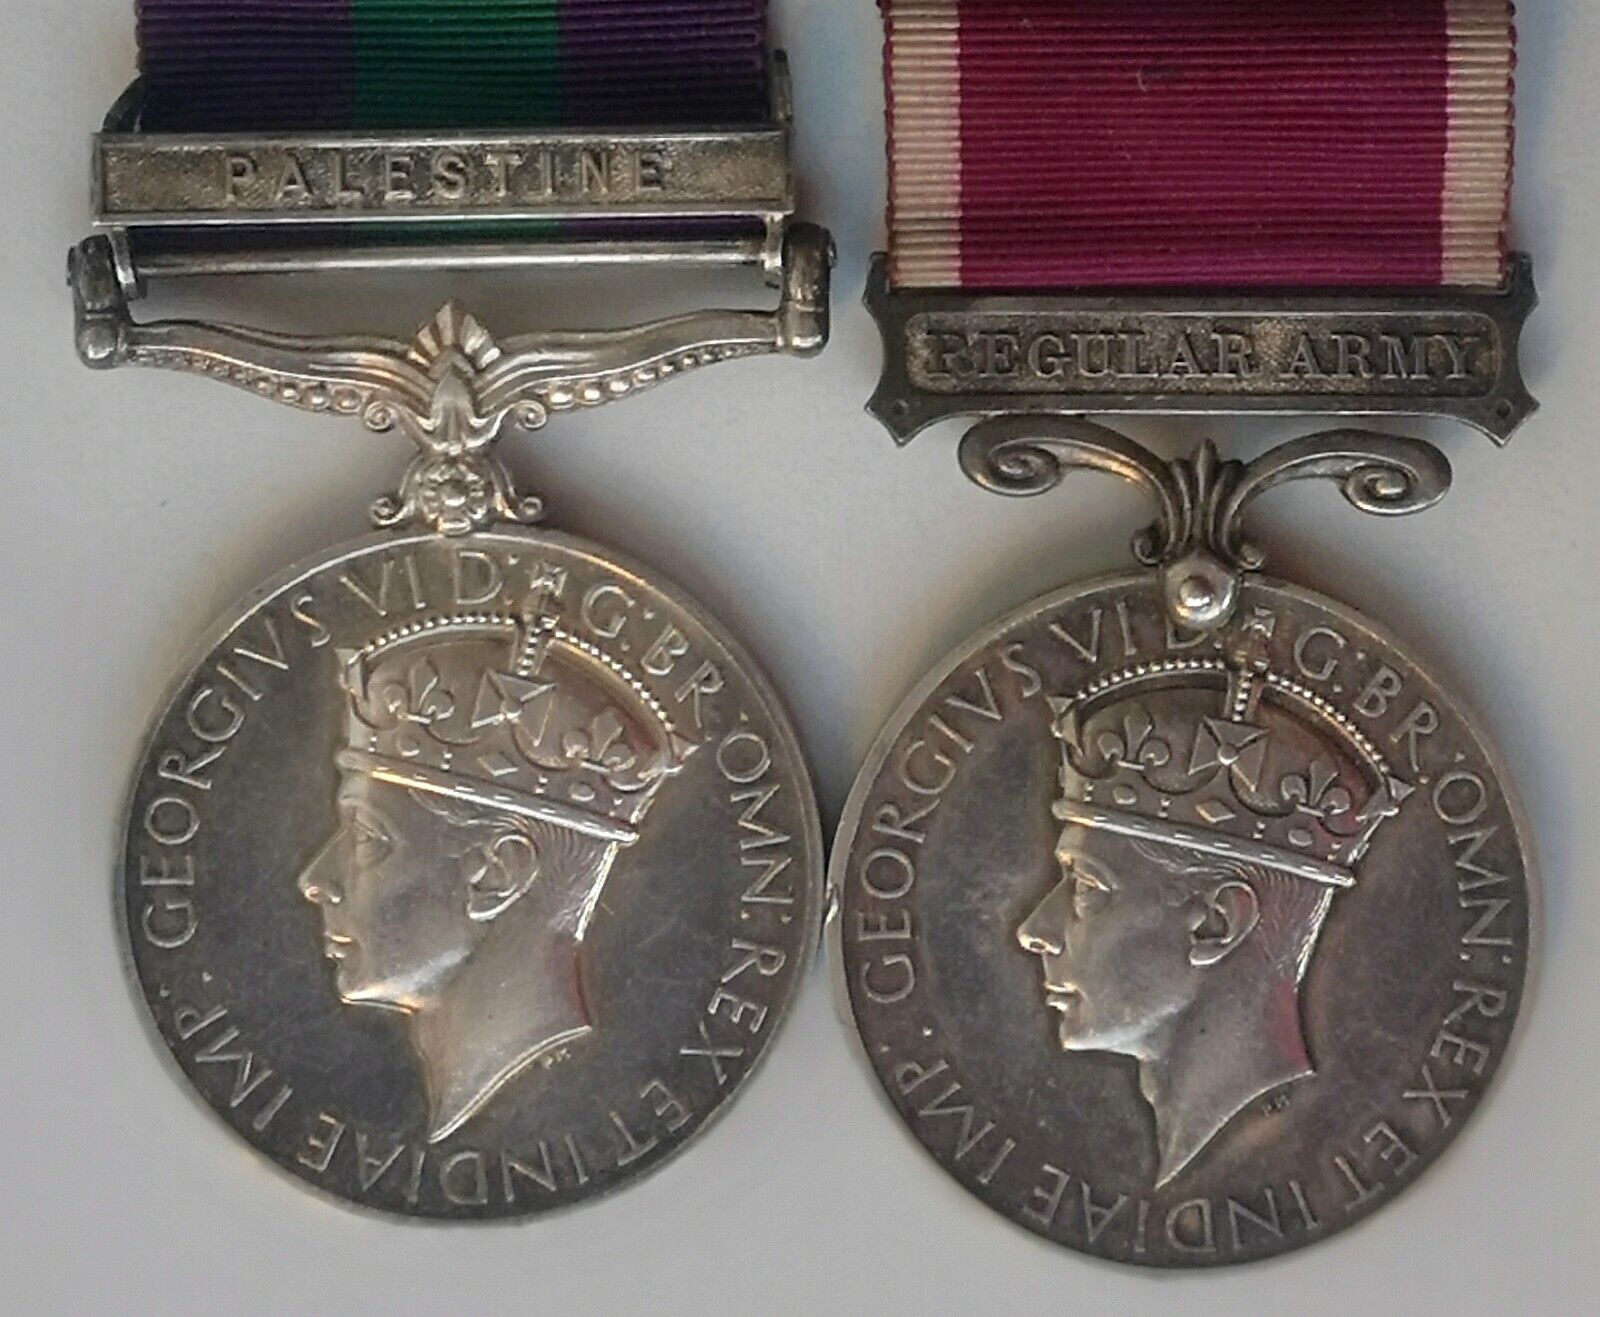  RAMC Palestine Clasp King’s Own GSM and LSGC Medal Pair, UK. Lieut. Col. 